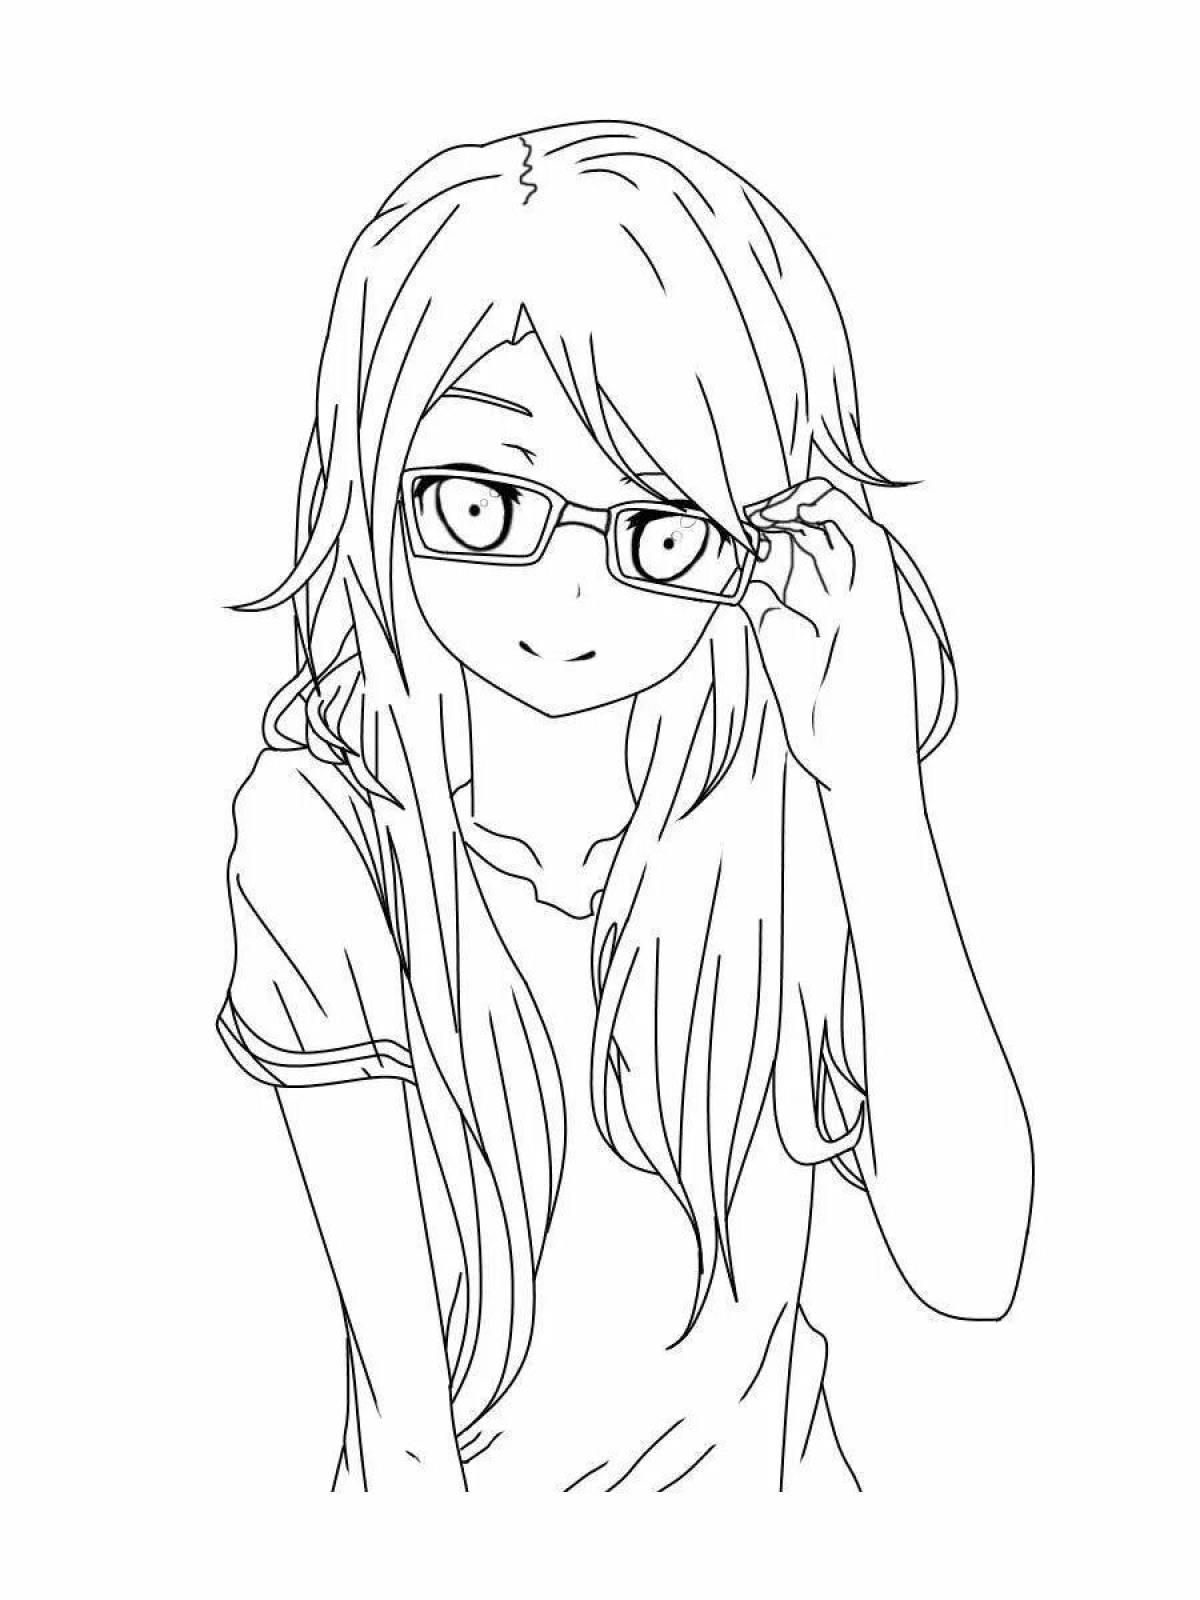 Exquisite coloring girl with glasses